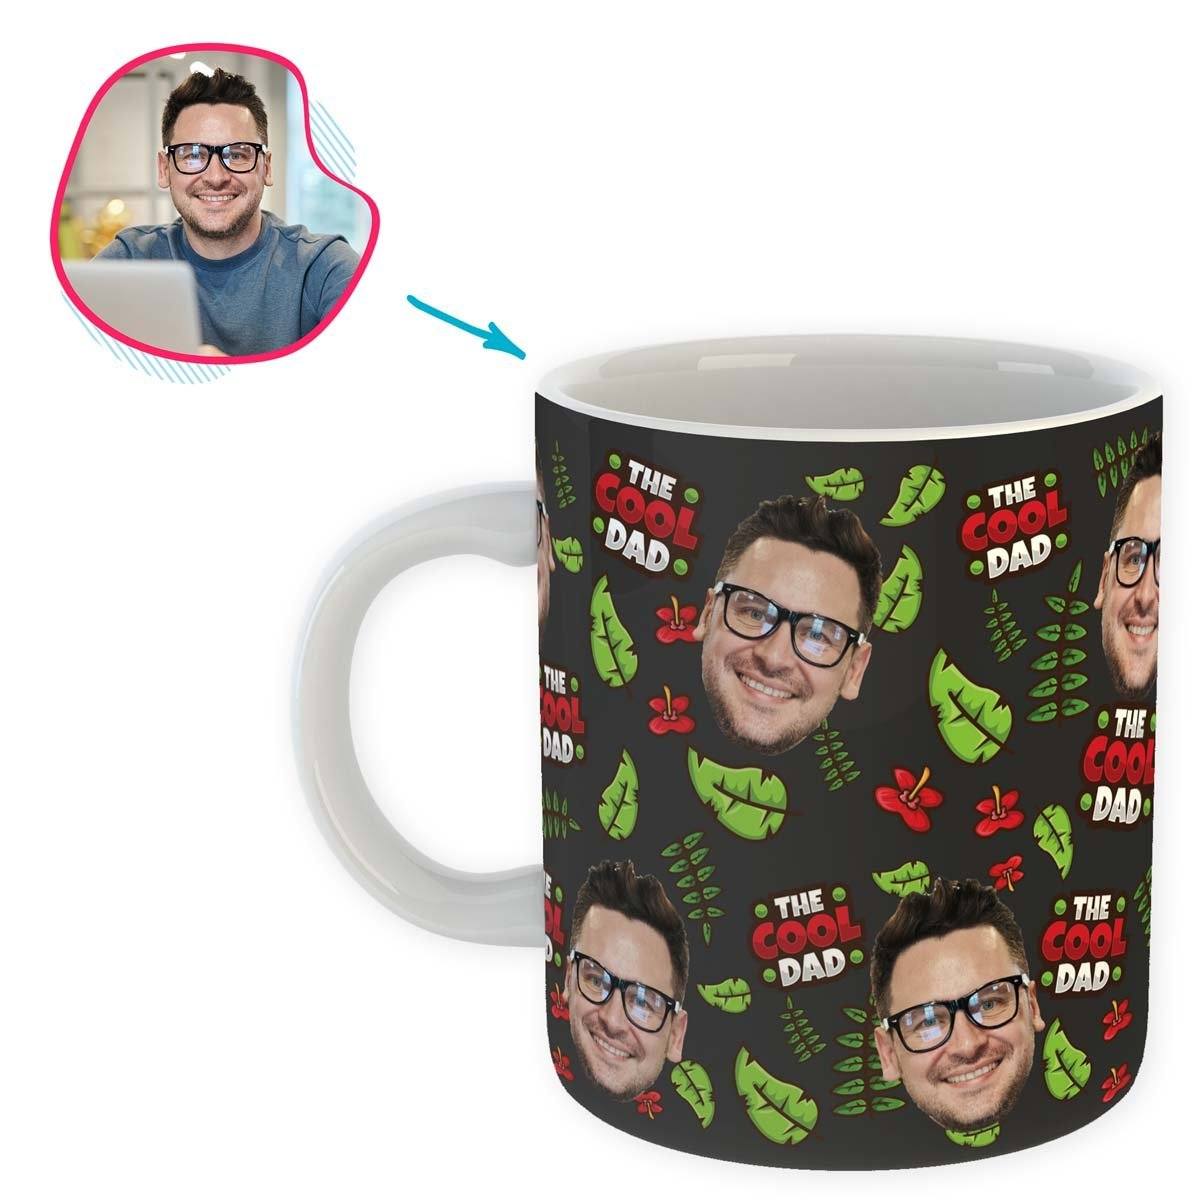 dark The Cool Dad mug personalized with photo of face printed on it